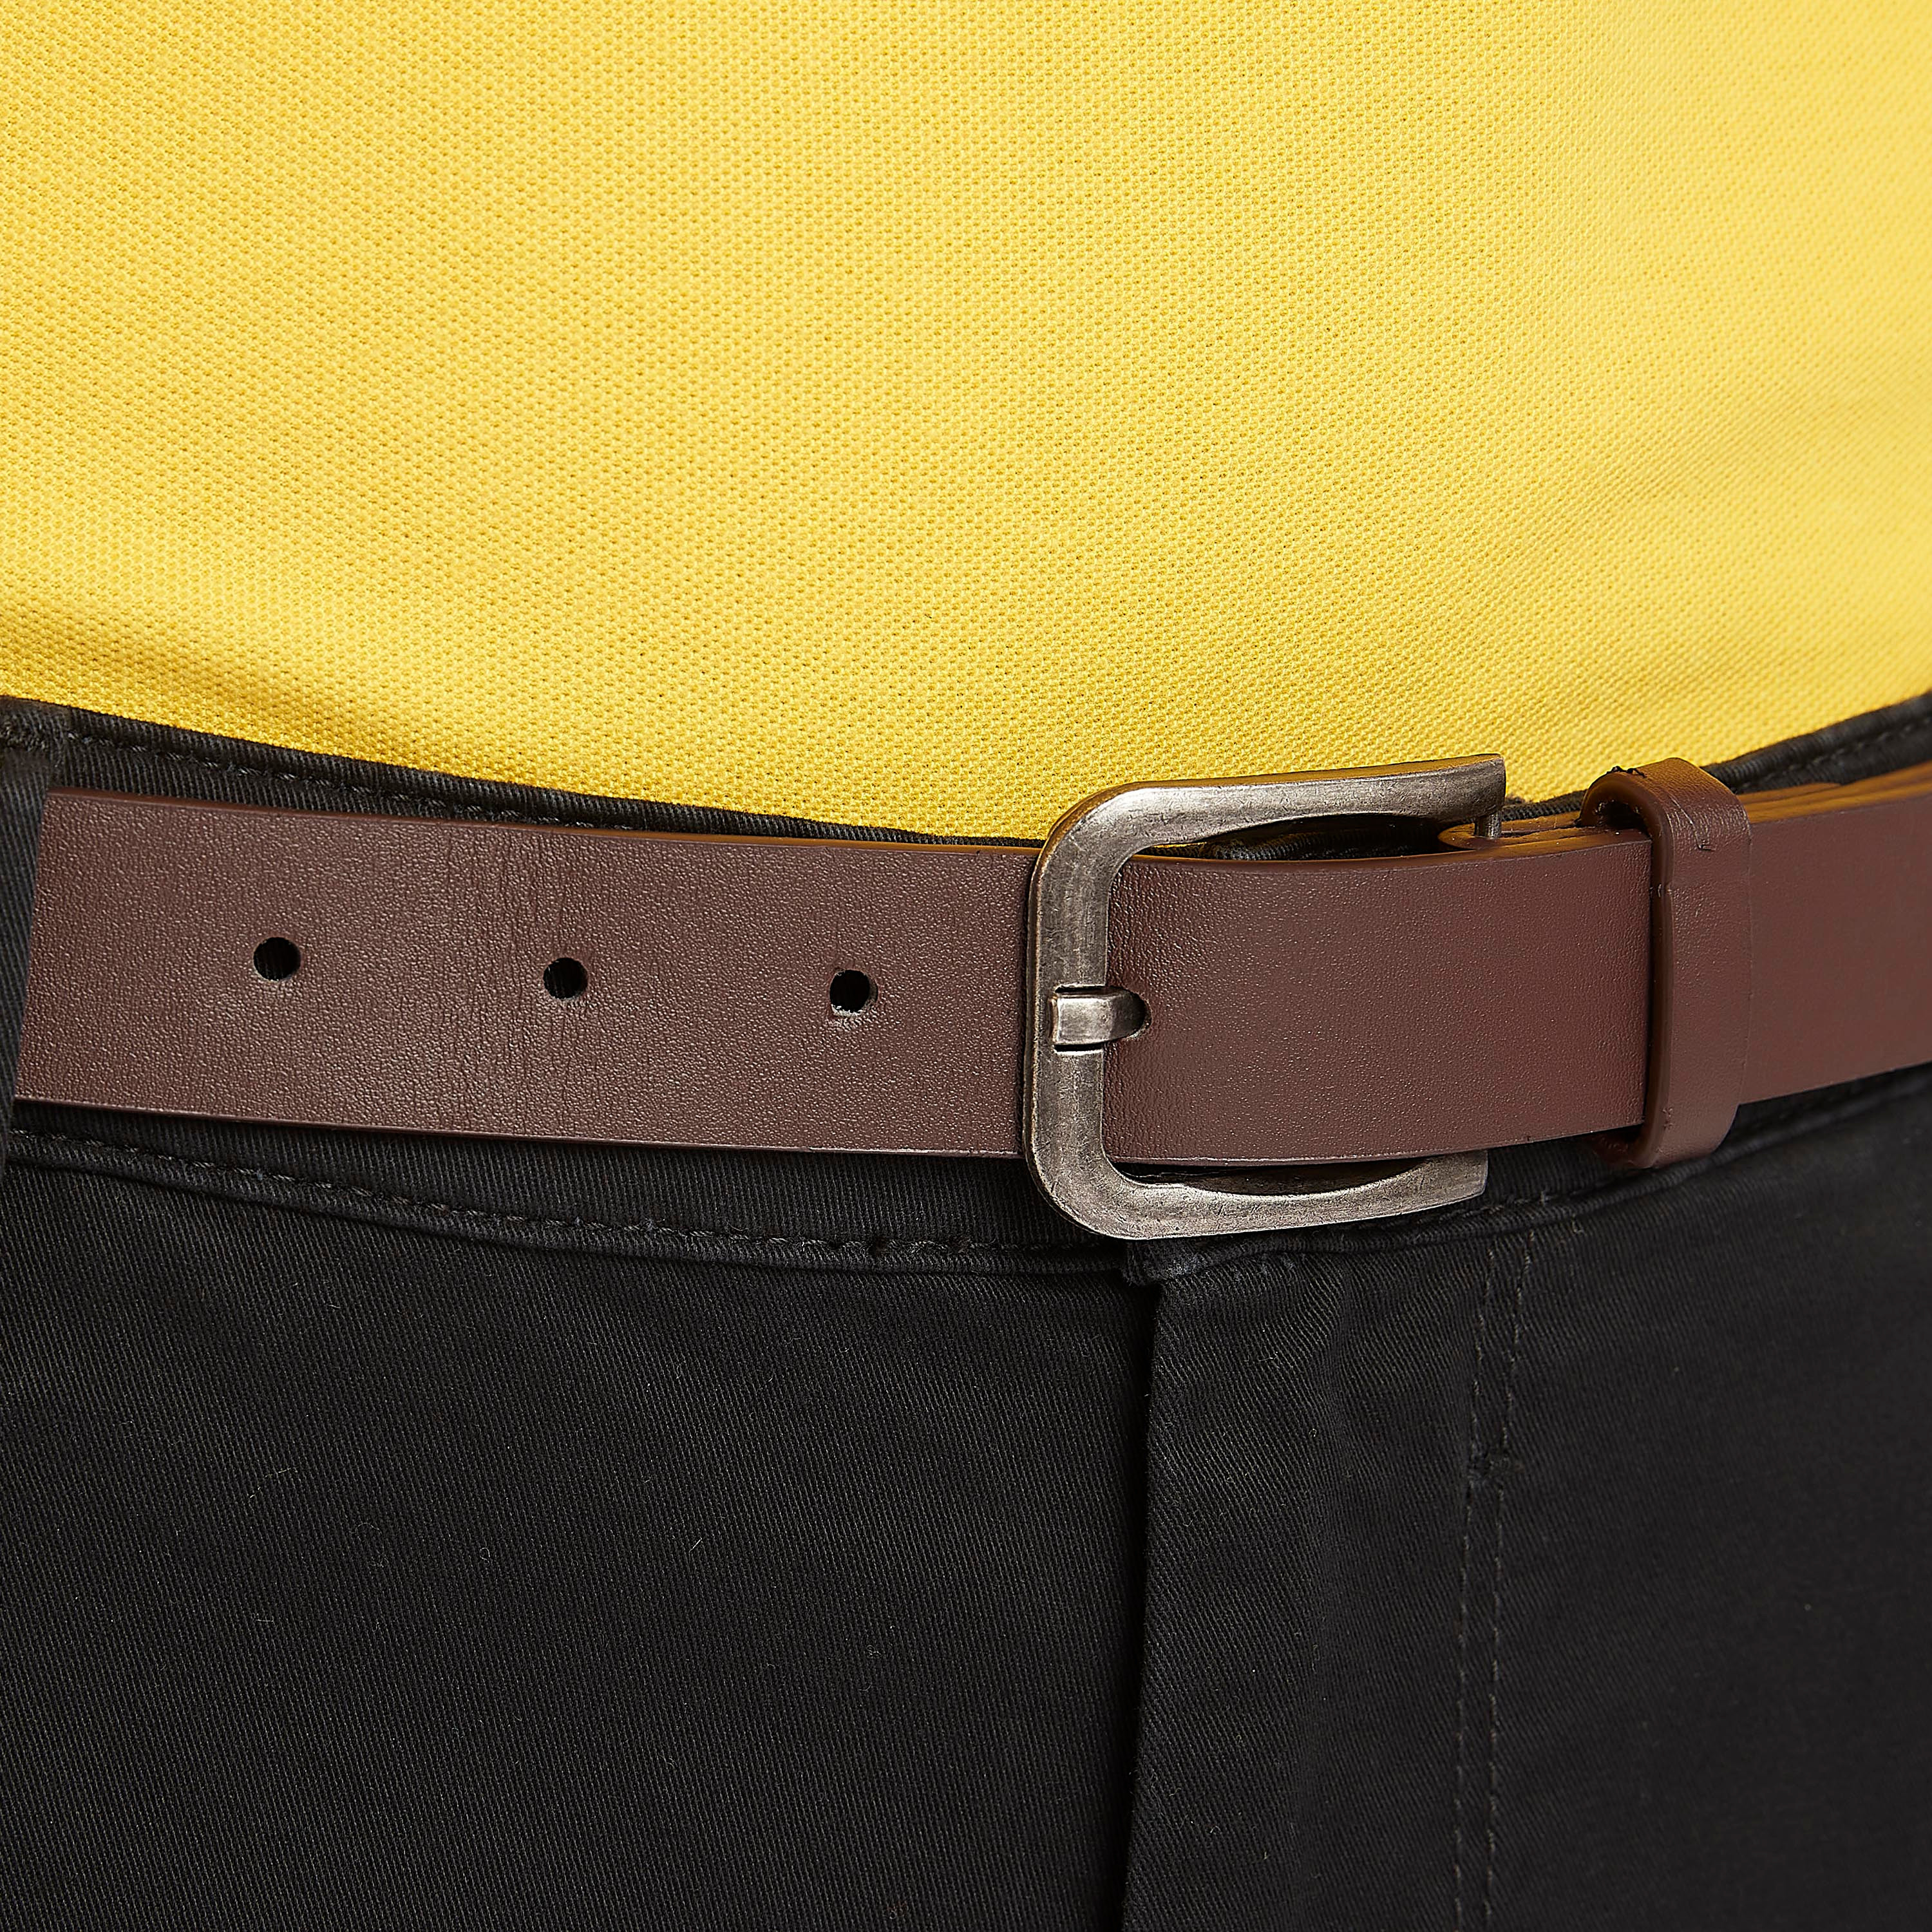 Solid Chino Pants with Button Closure and Pin Buckle Belt